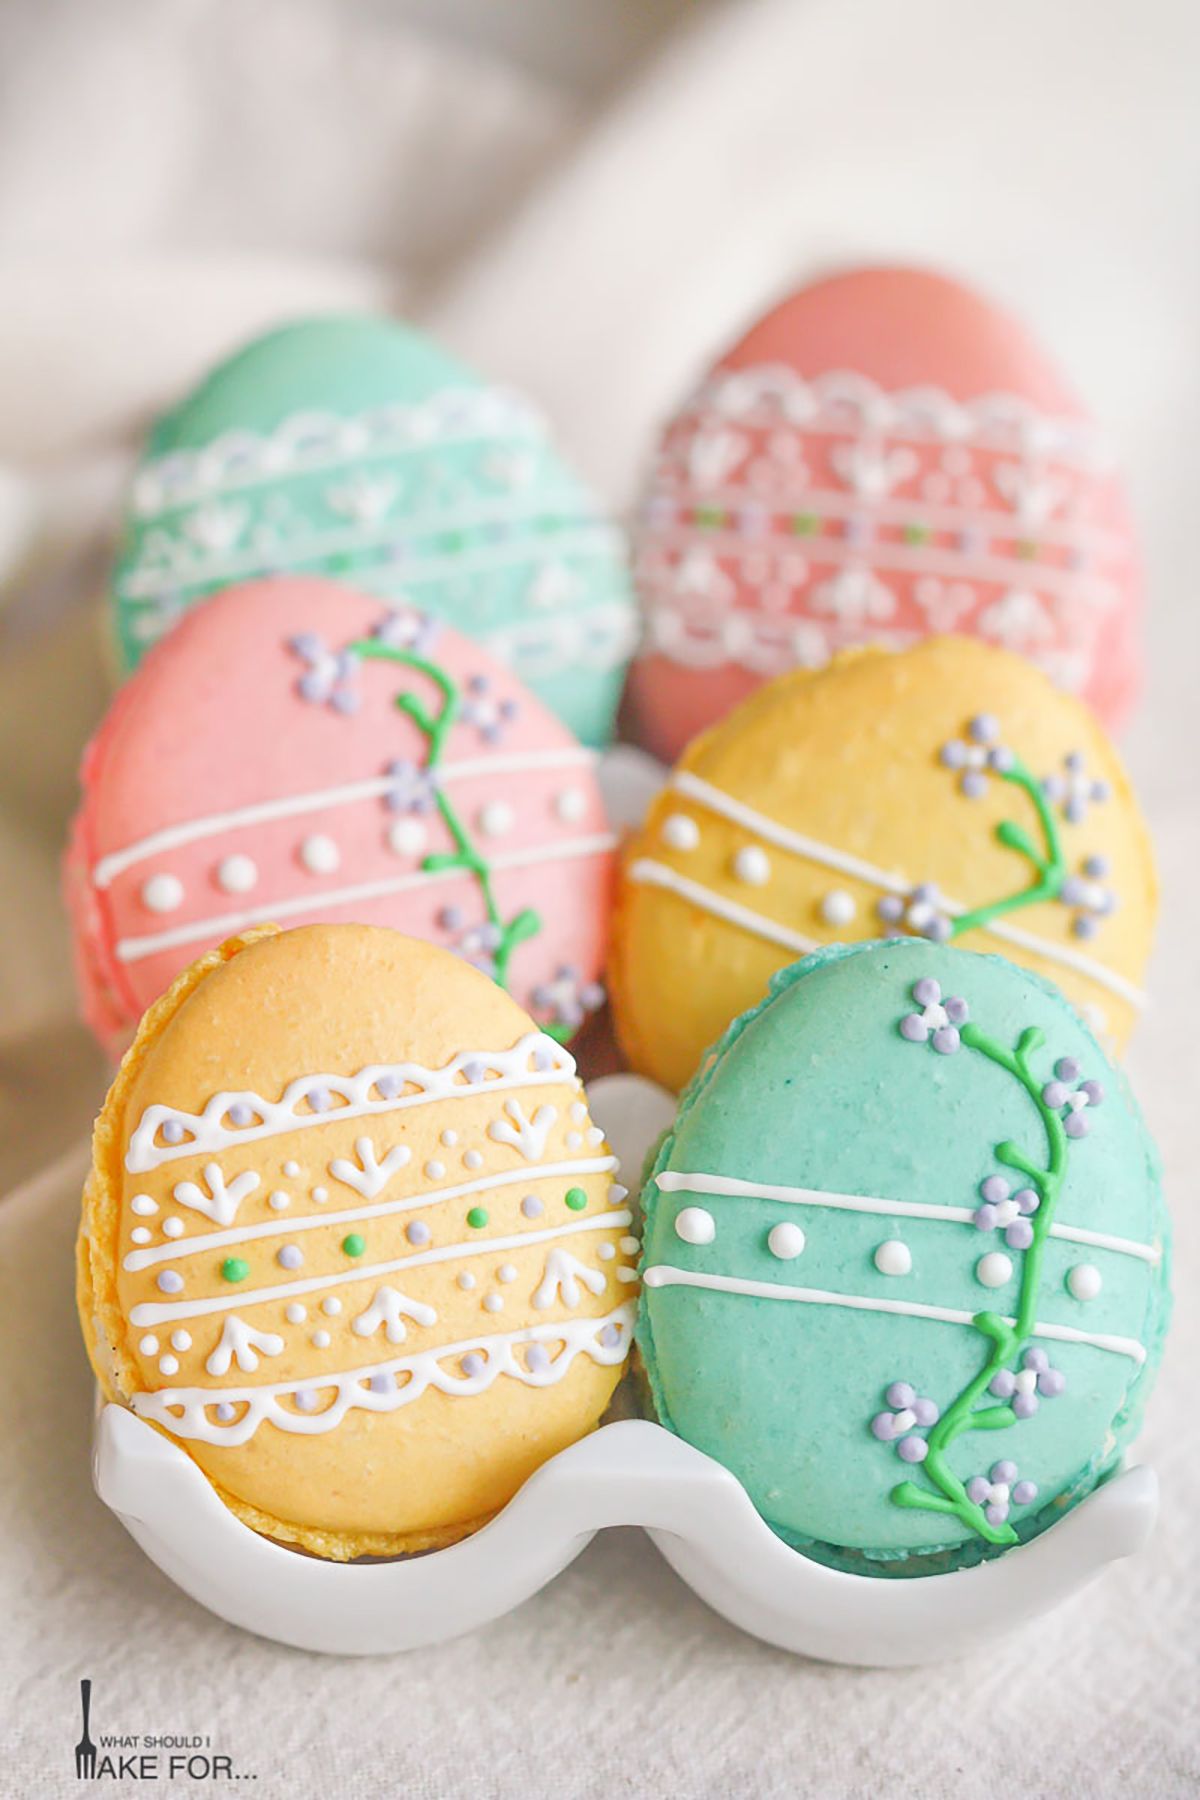 26 cute easter treats - ideas and recipes for easter treats